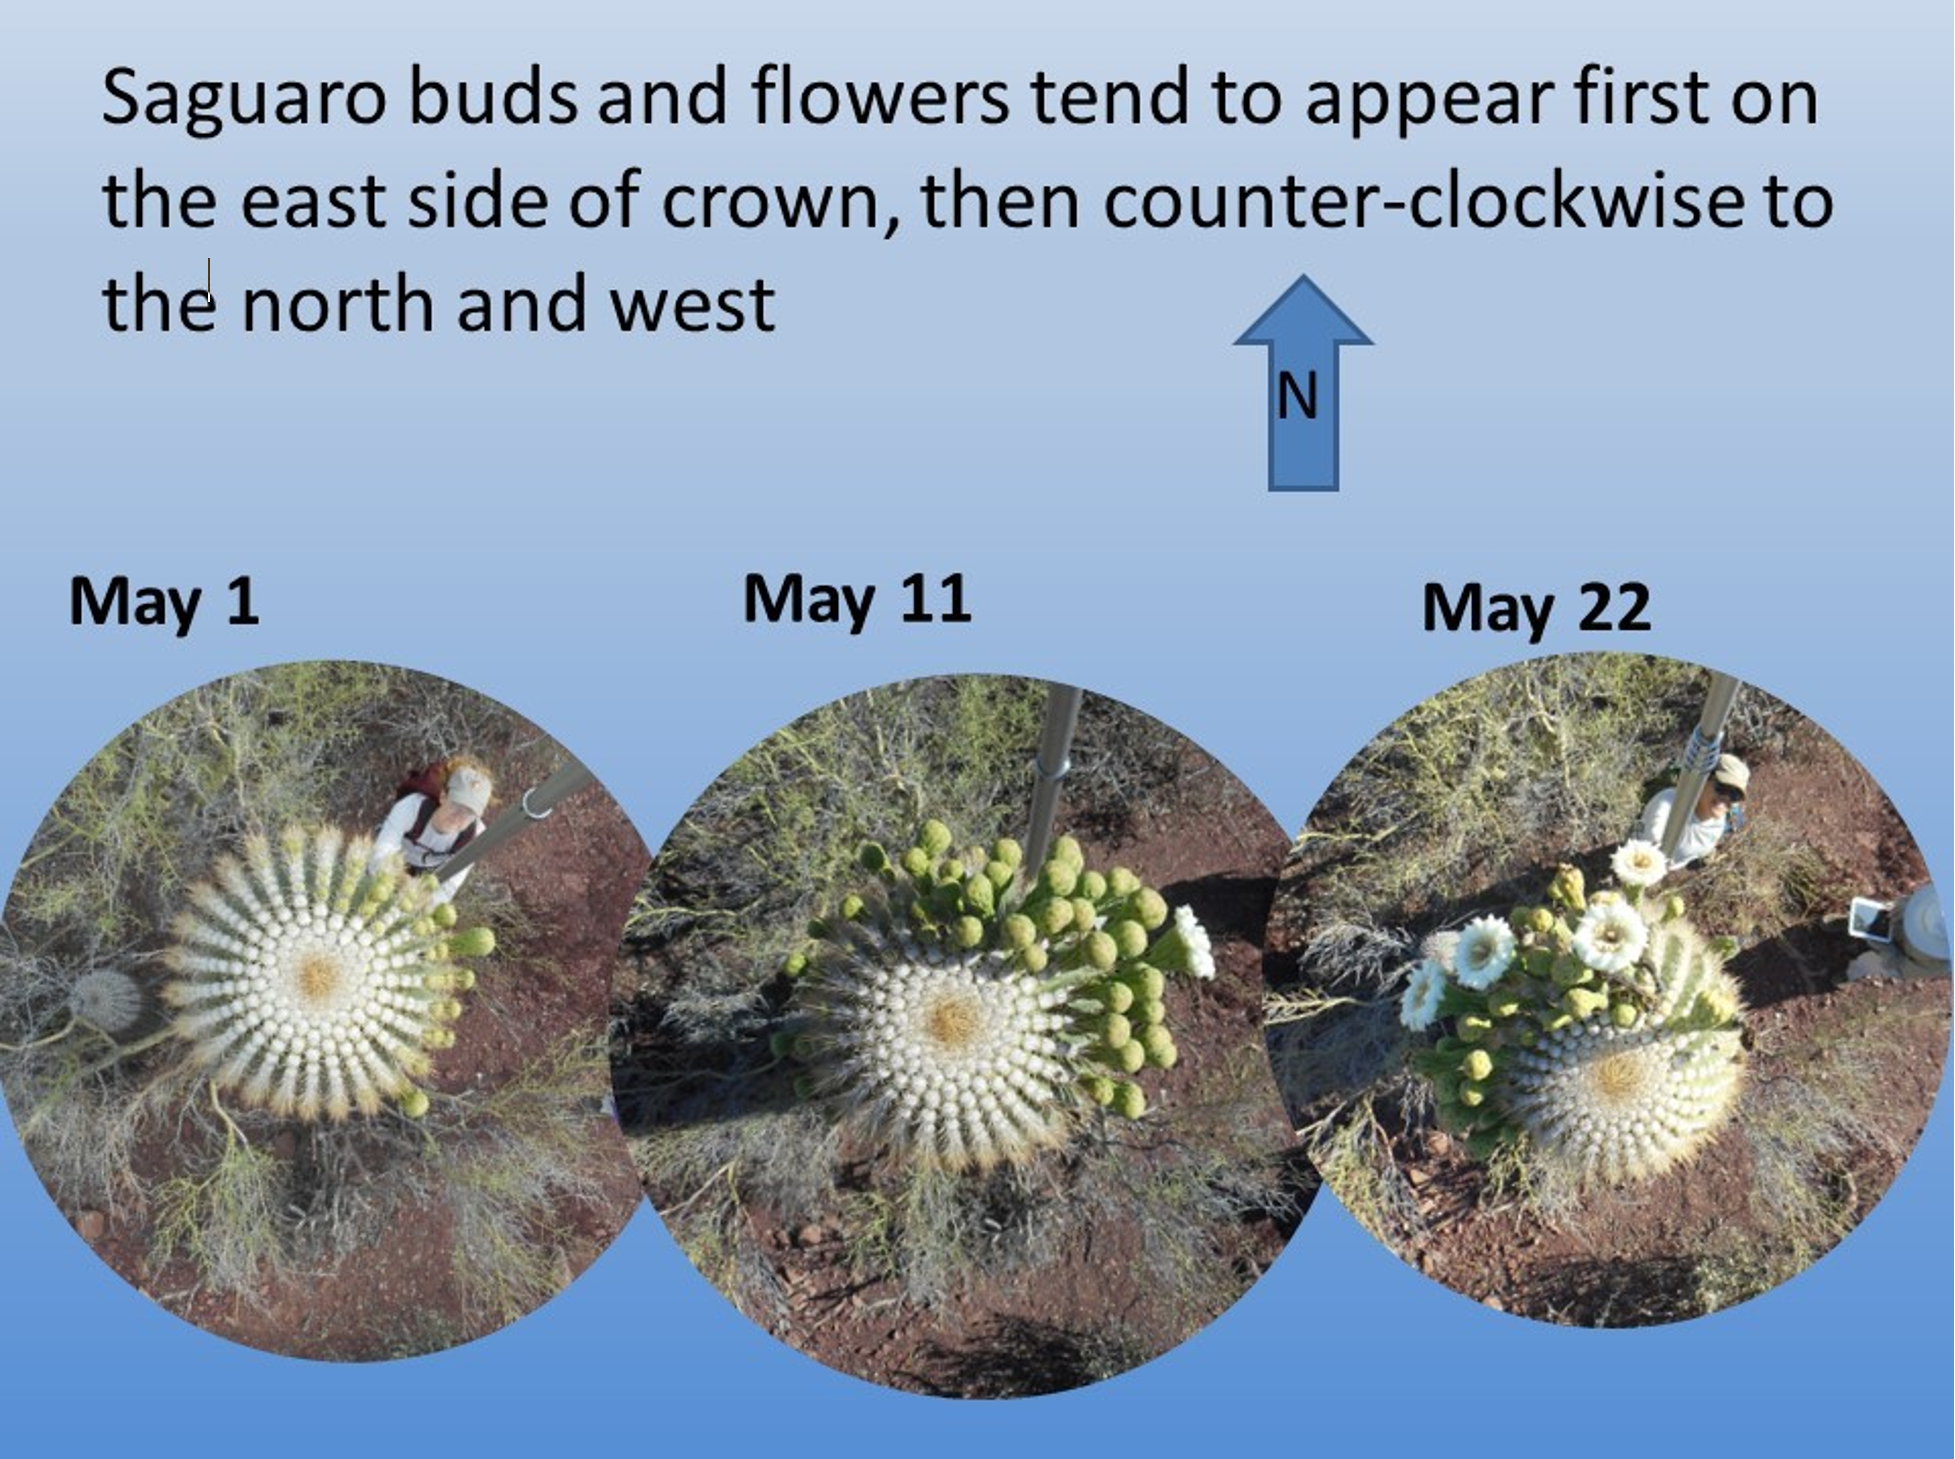 three circular images, each showing different amounts of flowers on the top of a Saguaro cactus, blooming from east to west.